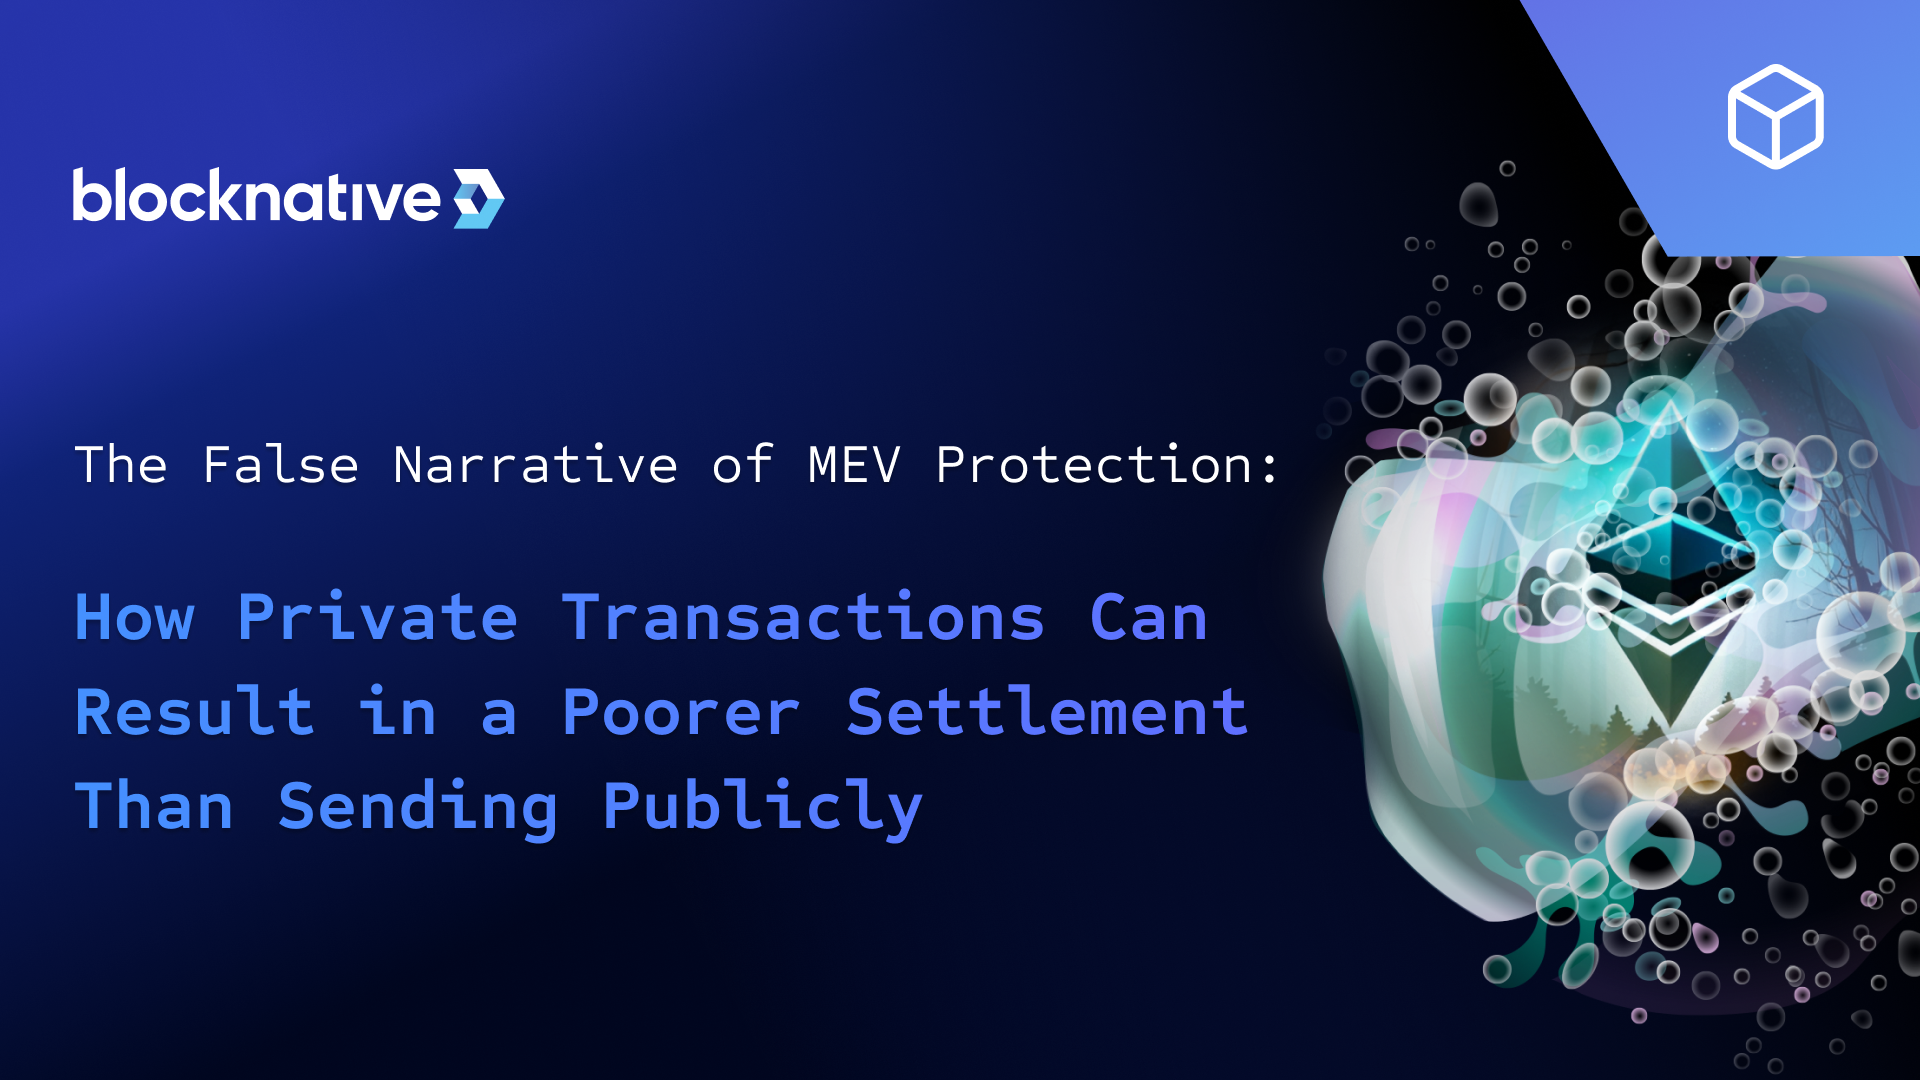 The False Narrative of MEV Protection: How Private Transactions Can Result in a Poorer Settlement Than Sending Publicly